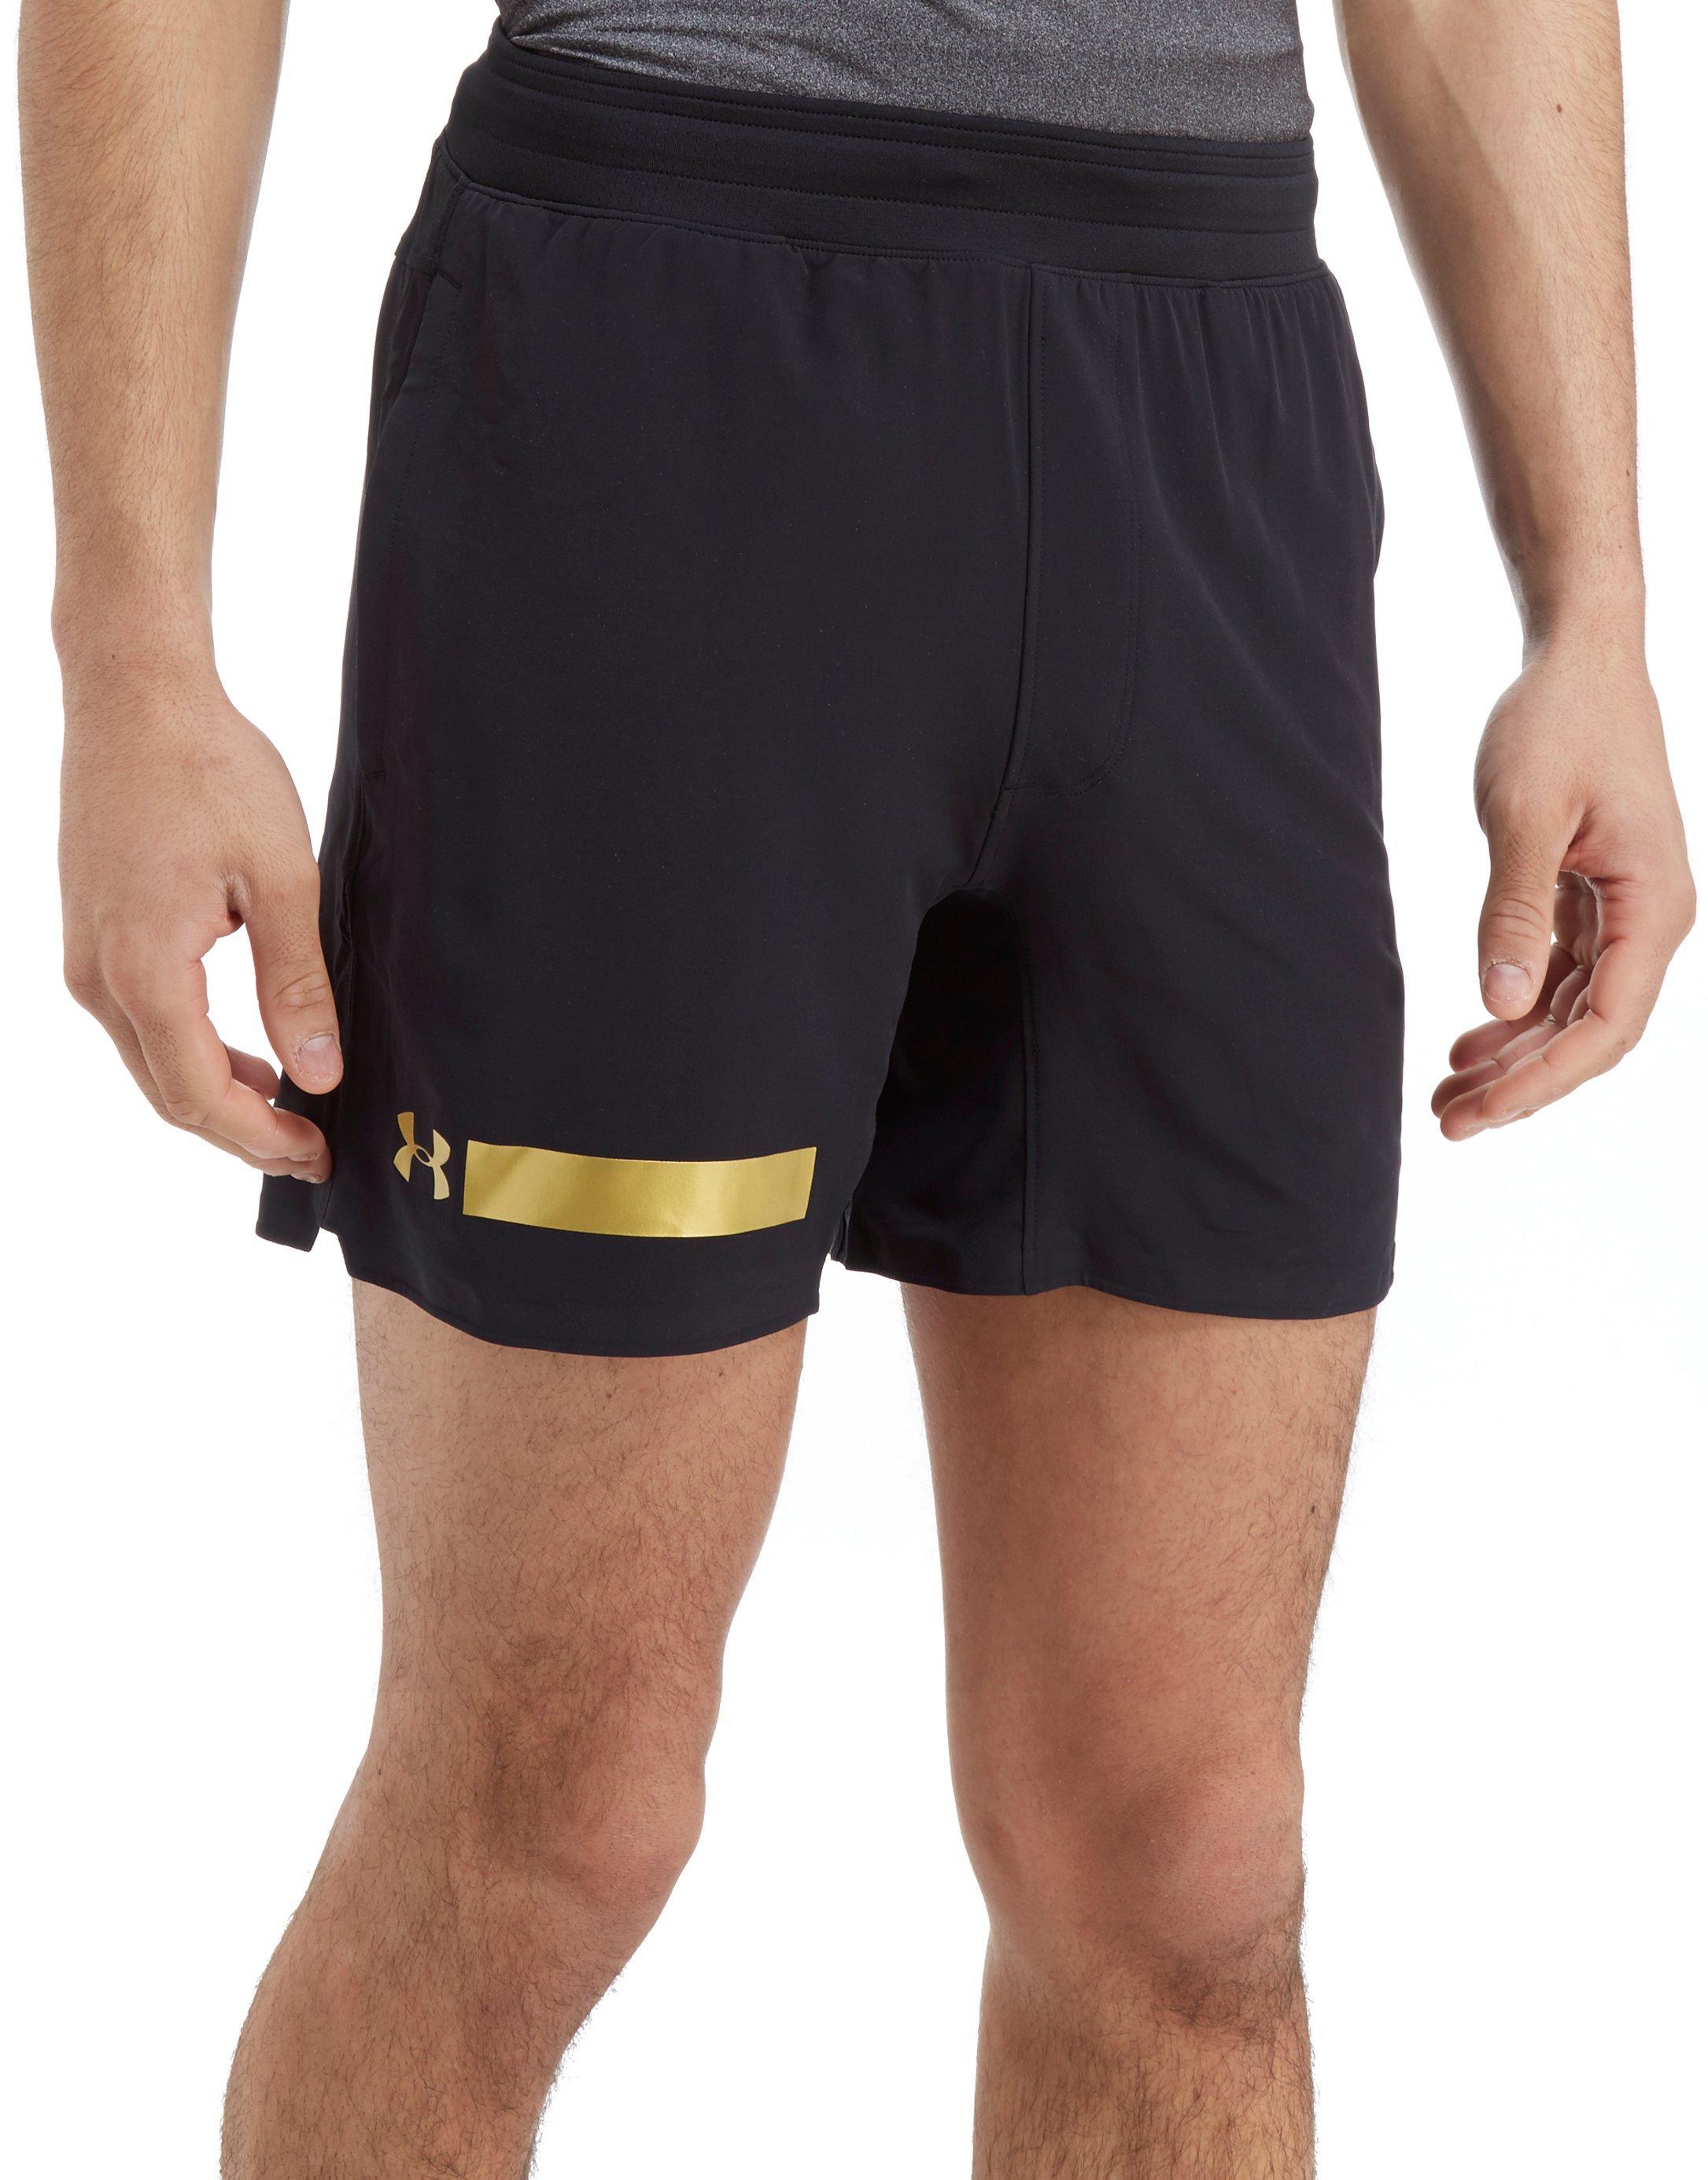 under armour perpetual shorts